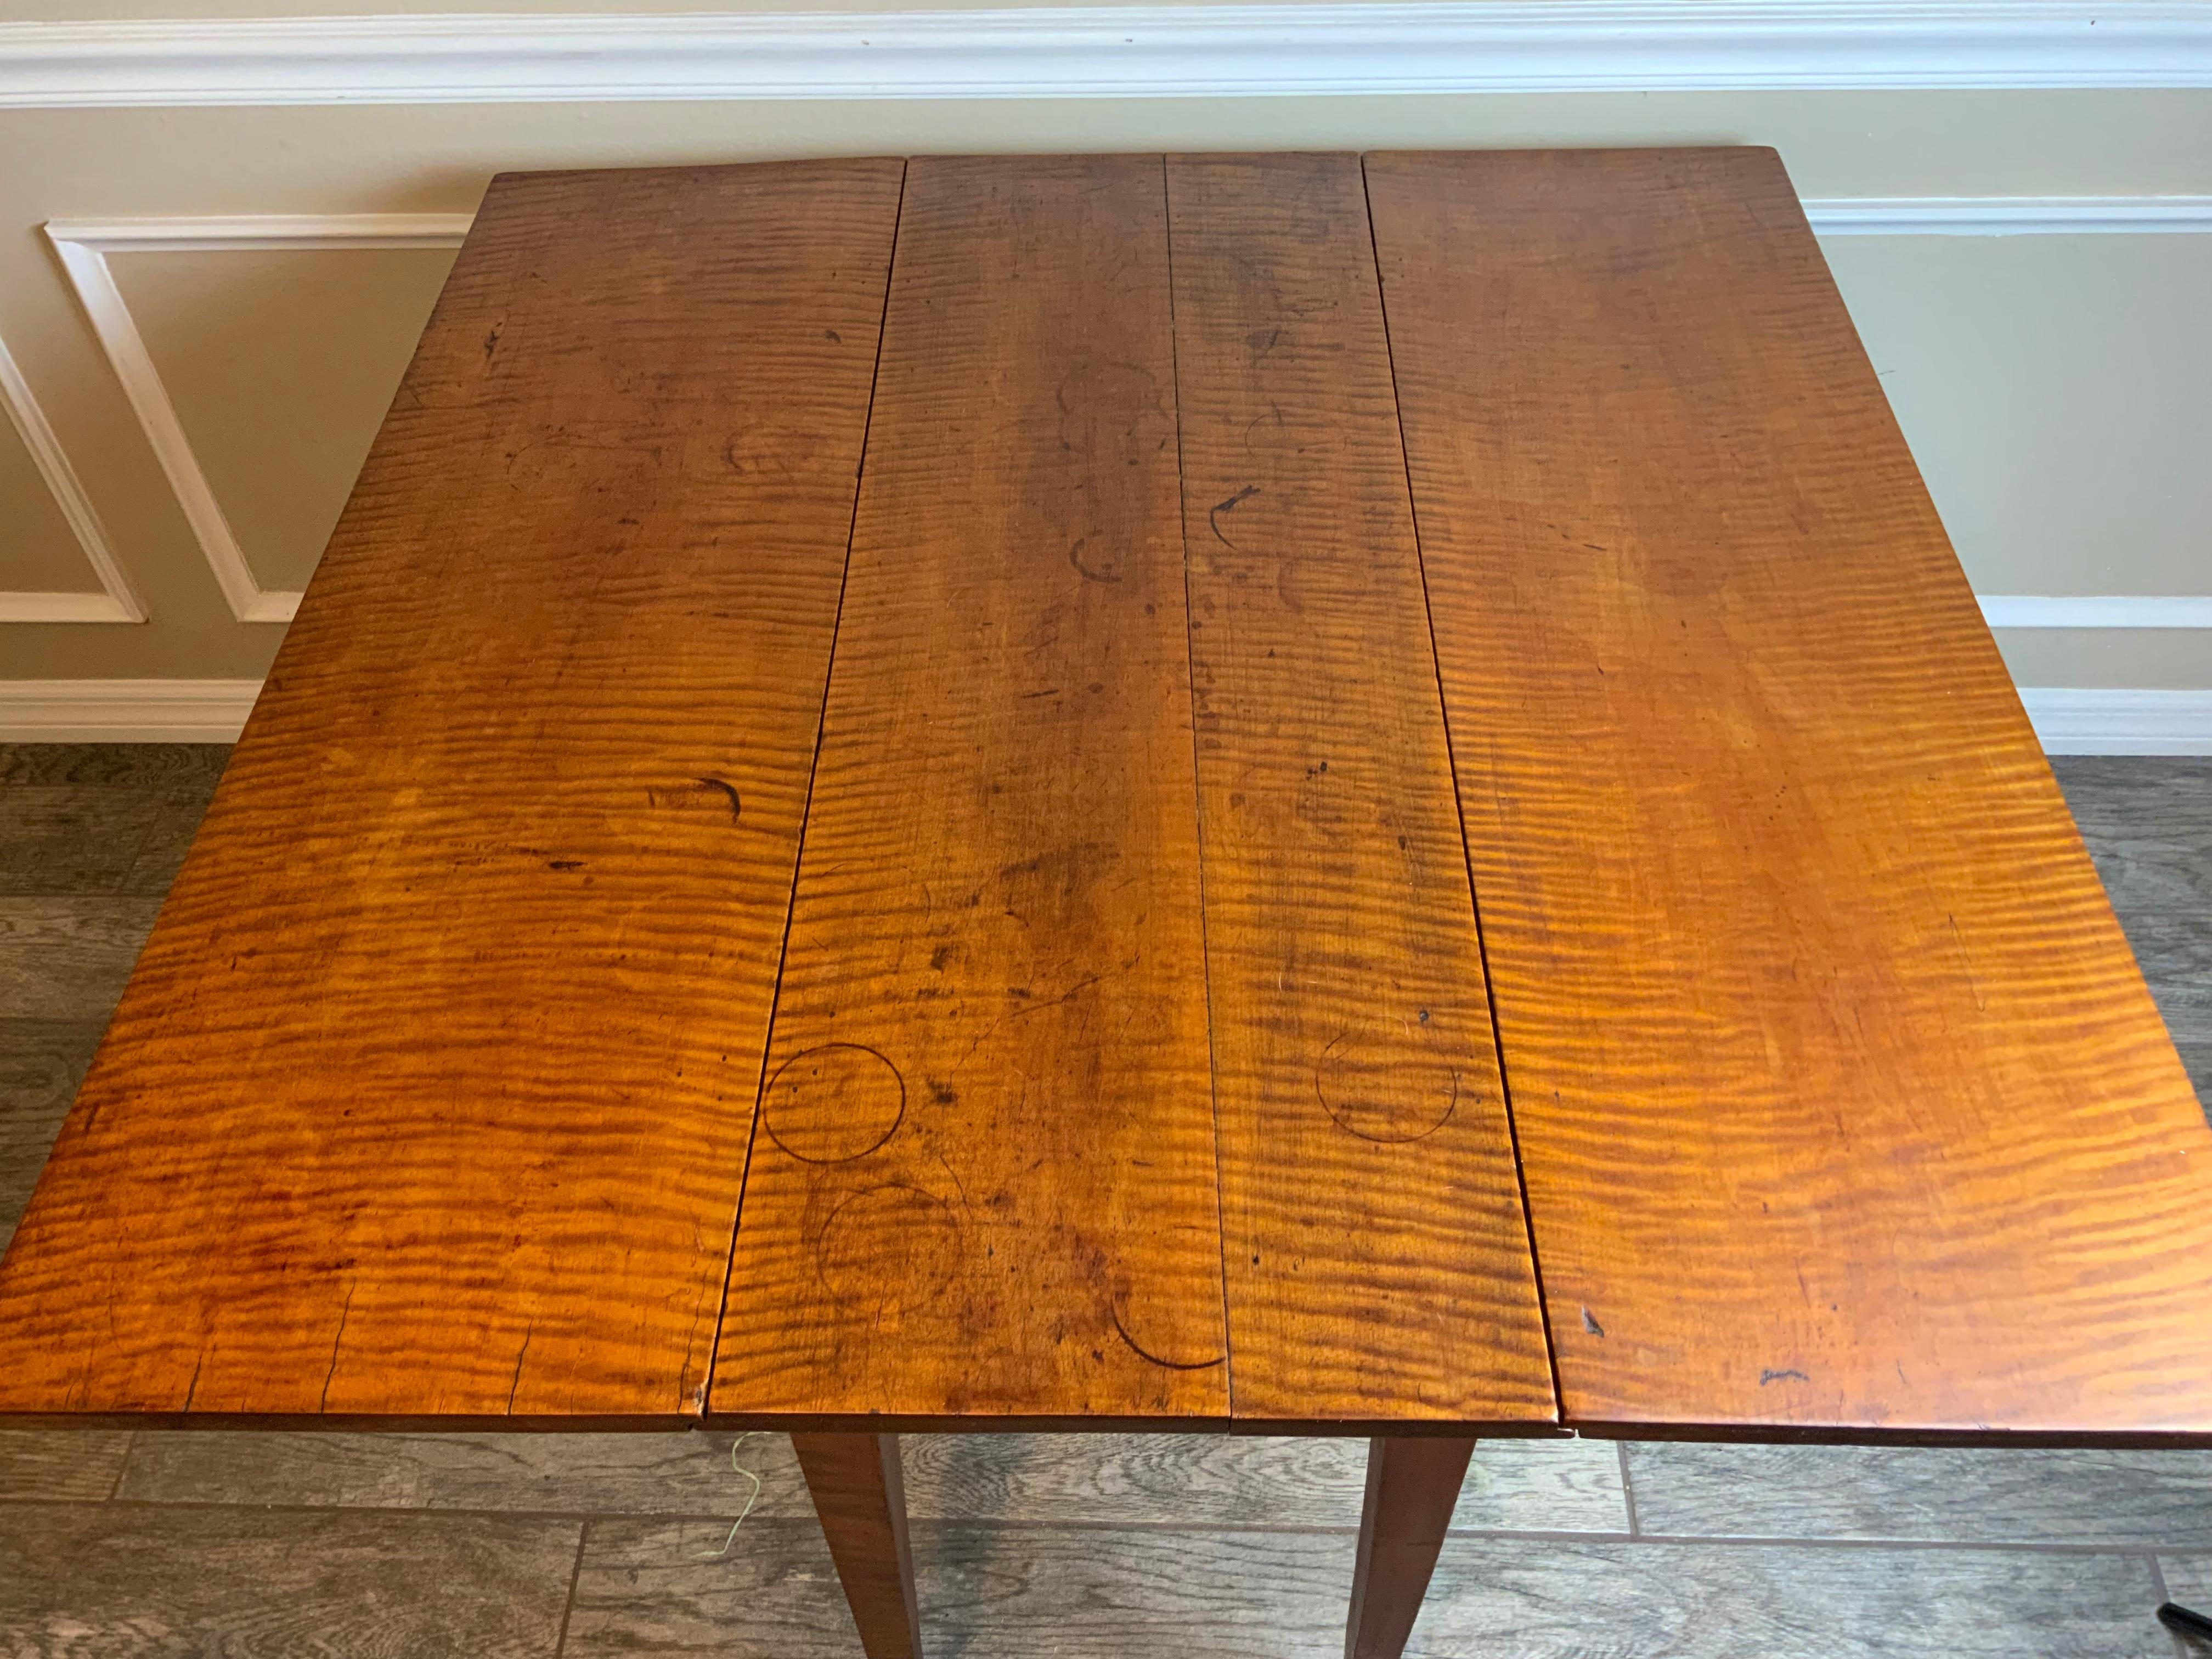 Nicely figured Federal curly Maple table 1790-1815 with tapered splayed legs. This is a very clean table in great condition with an old refinish exhibiting great color and patina. The total width with the leaves up is 41.25.

Condition: Very good